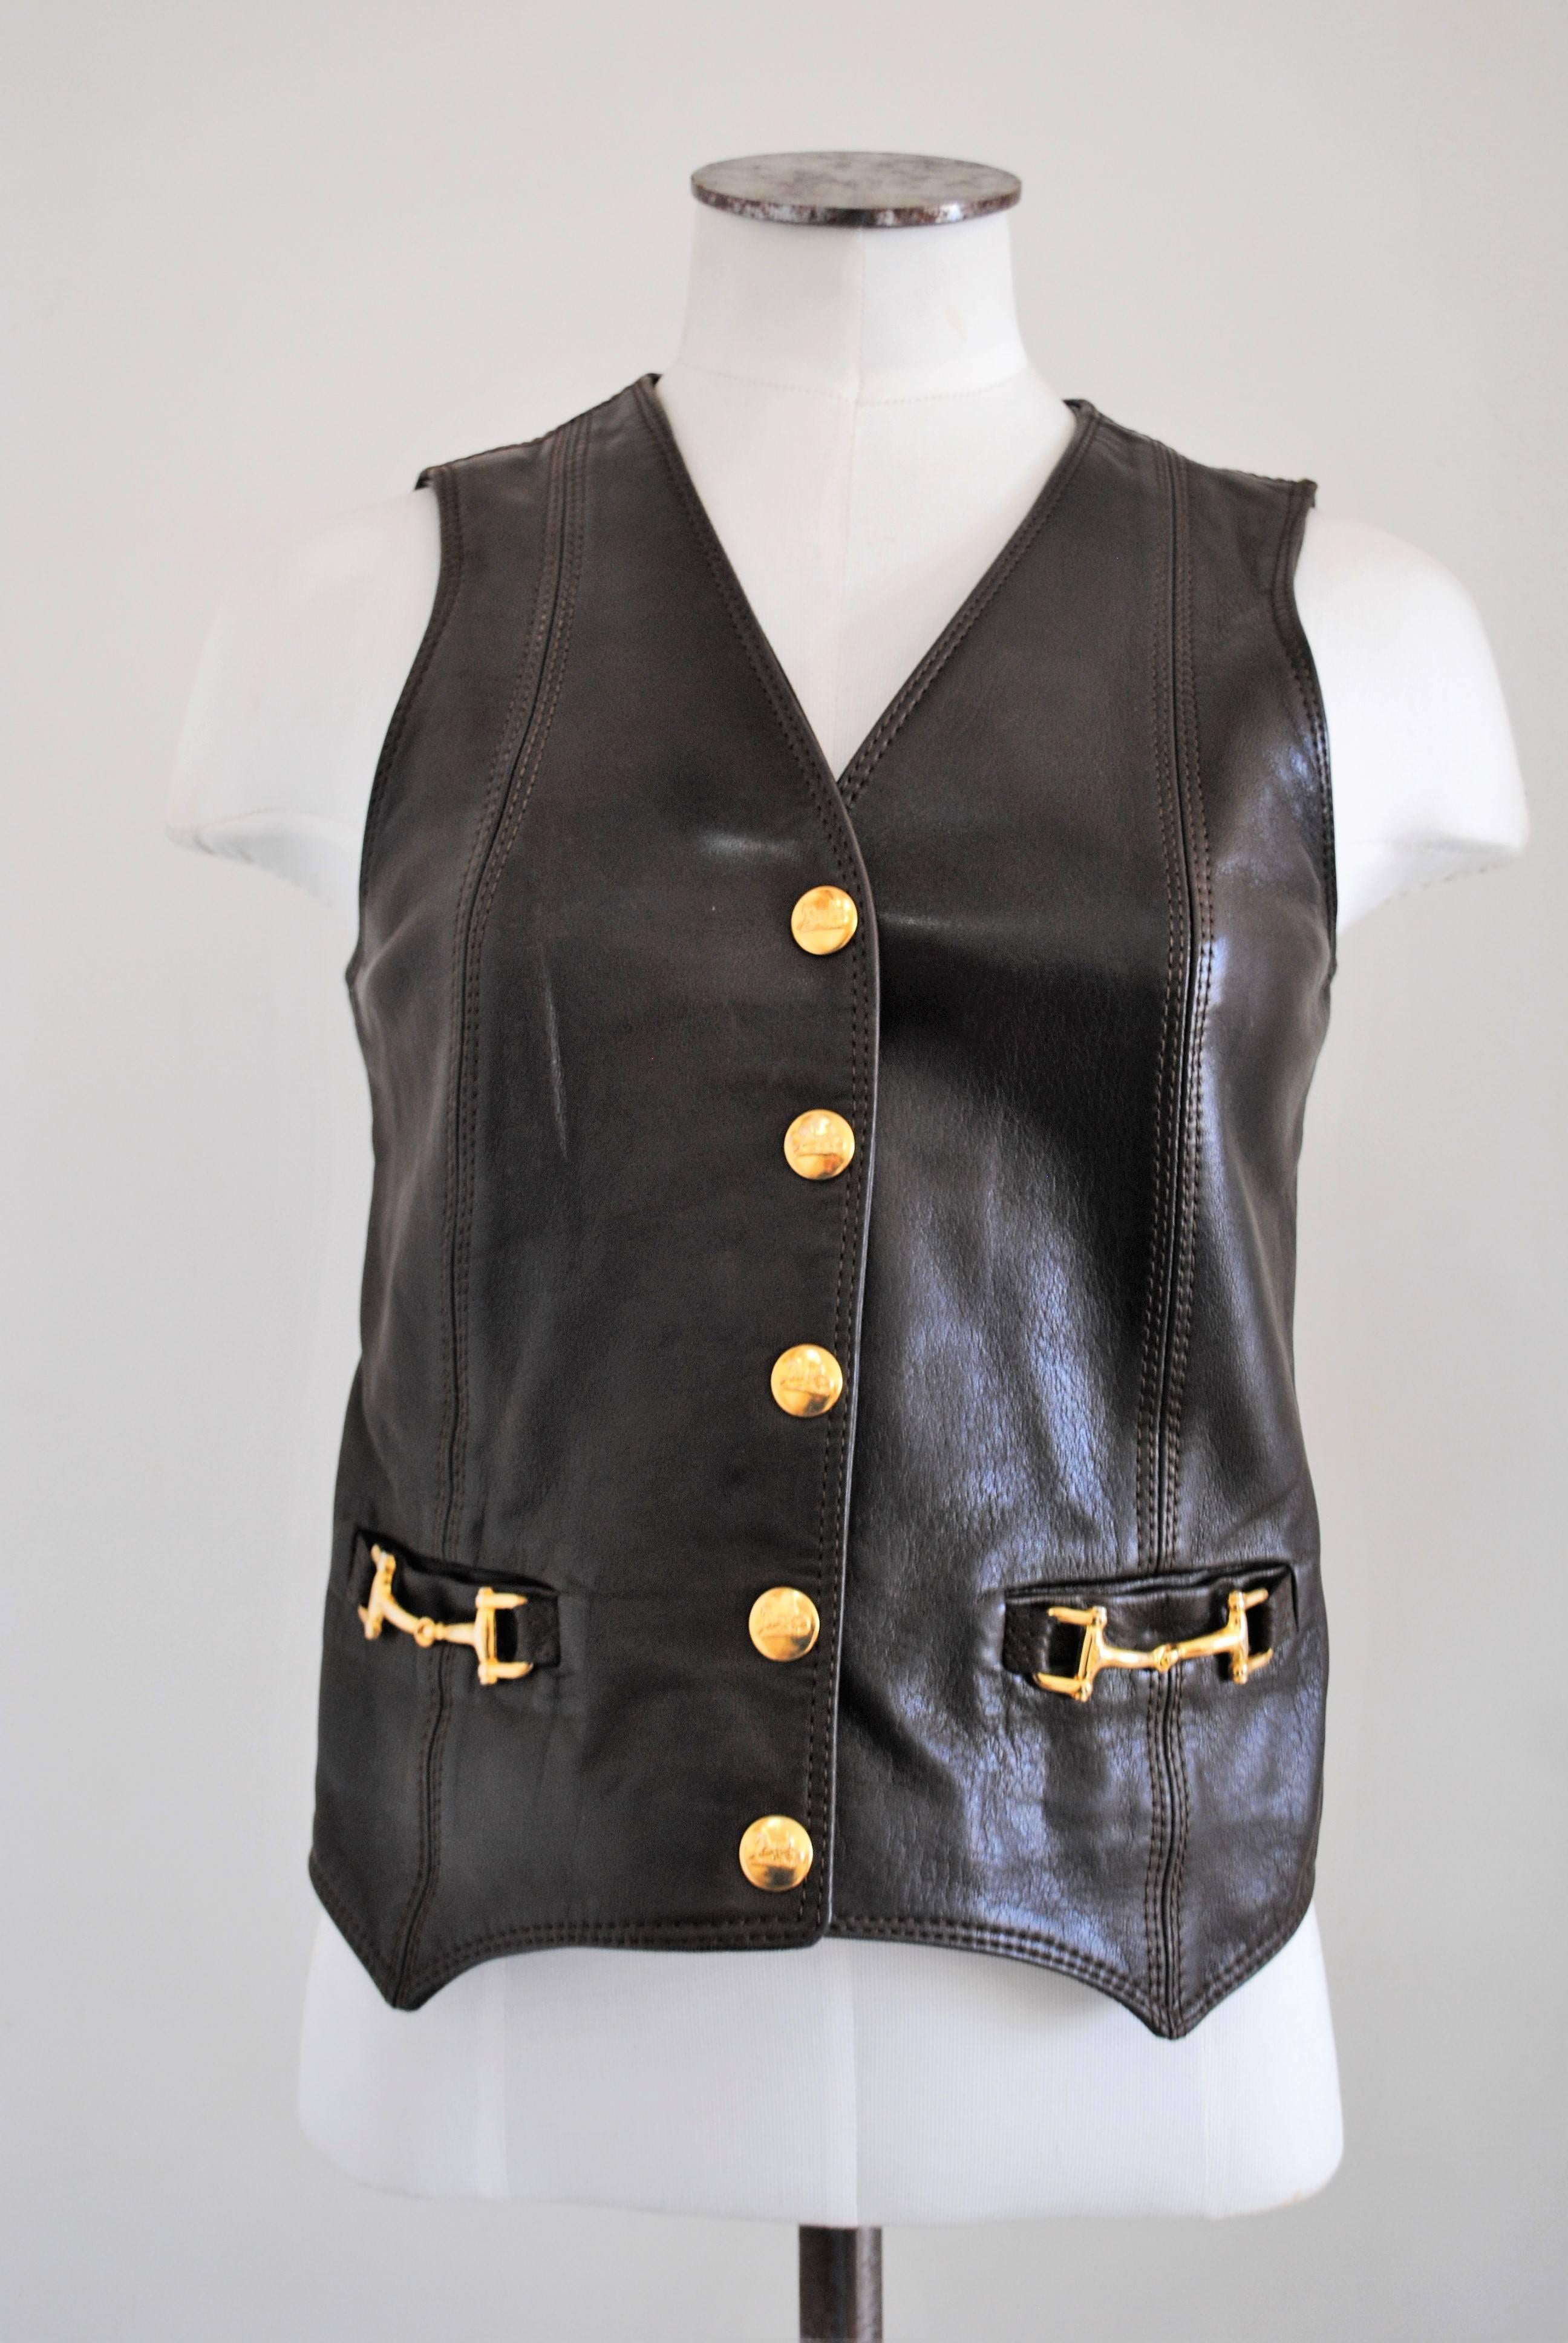 Celine brown leather Gilet
Gold tone hardware
Totally made in france 